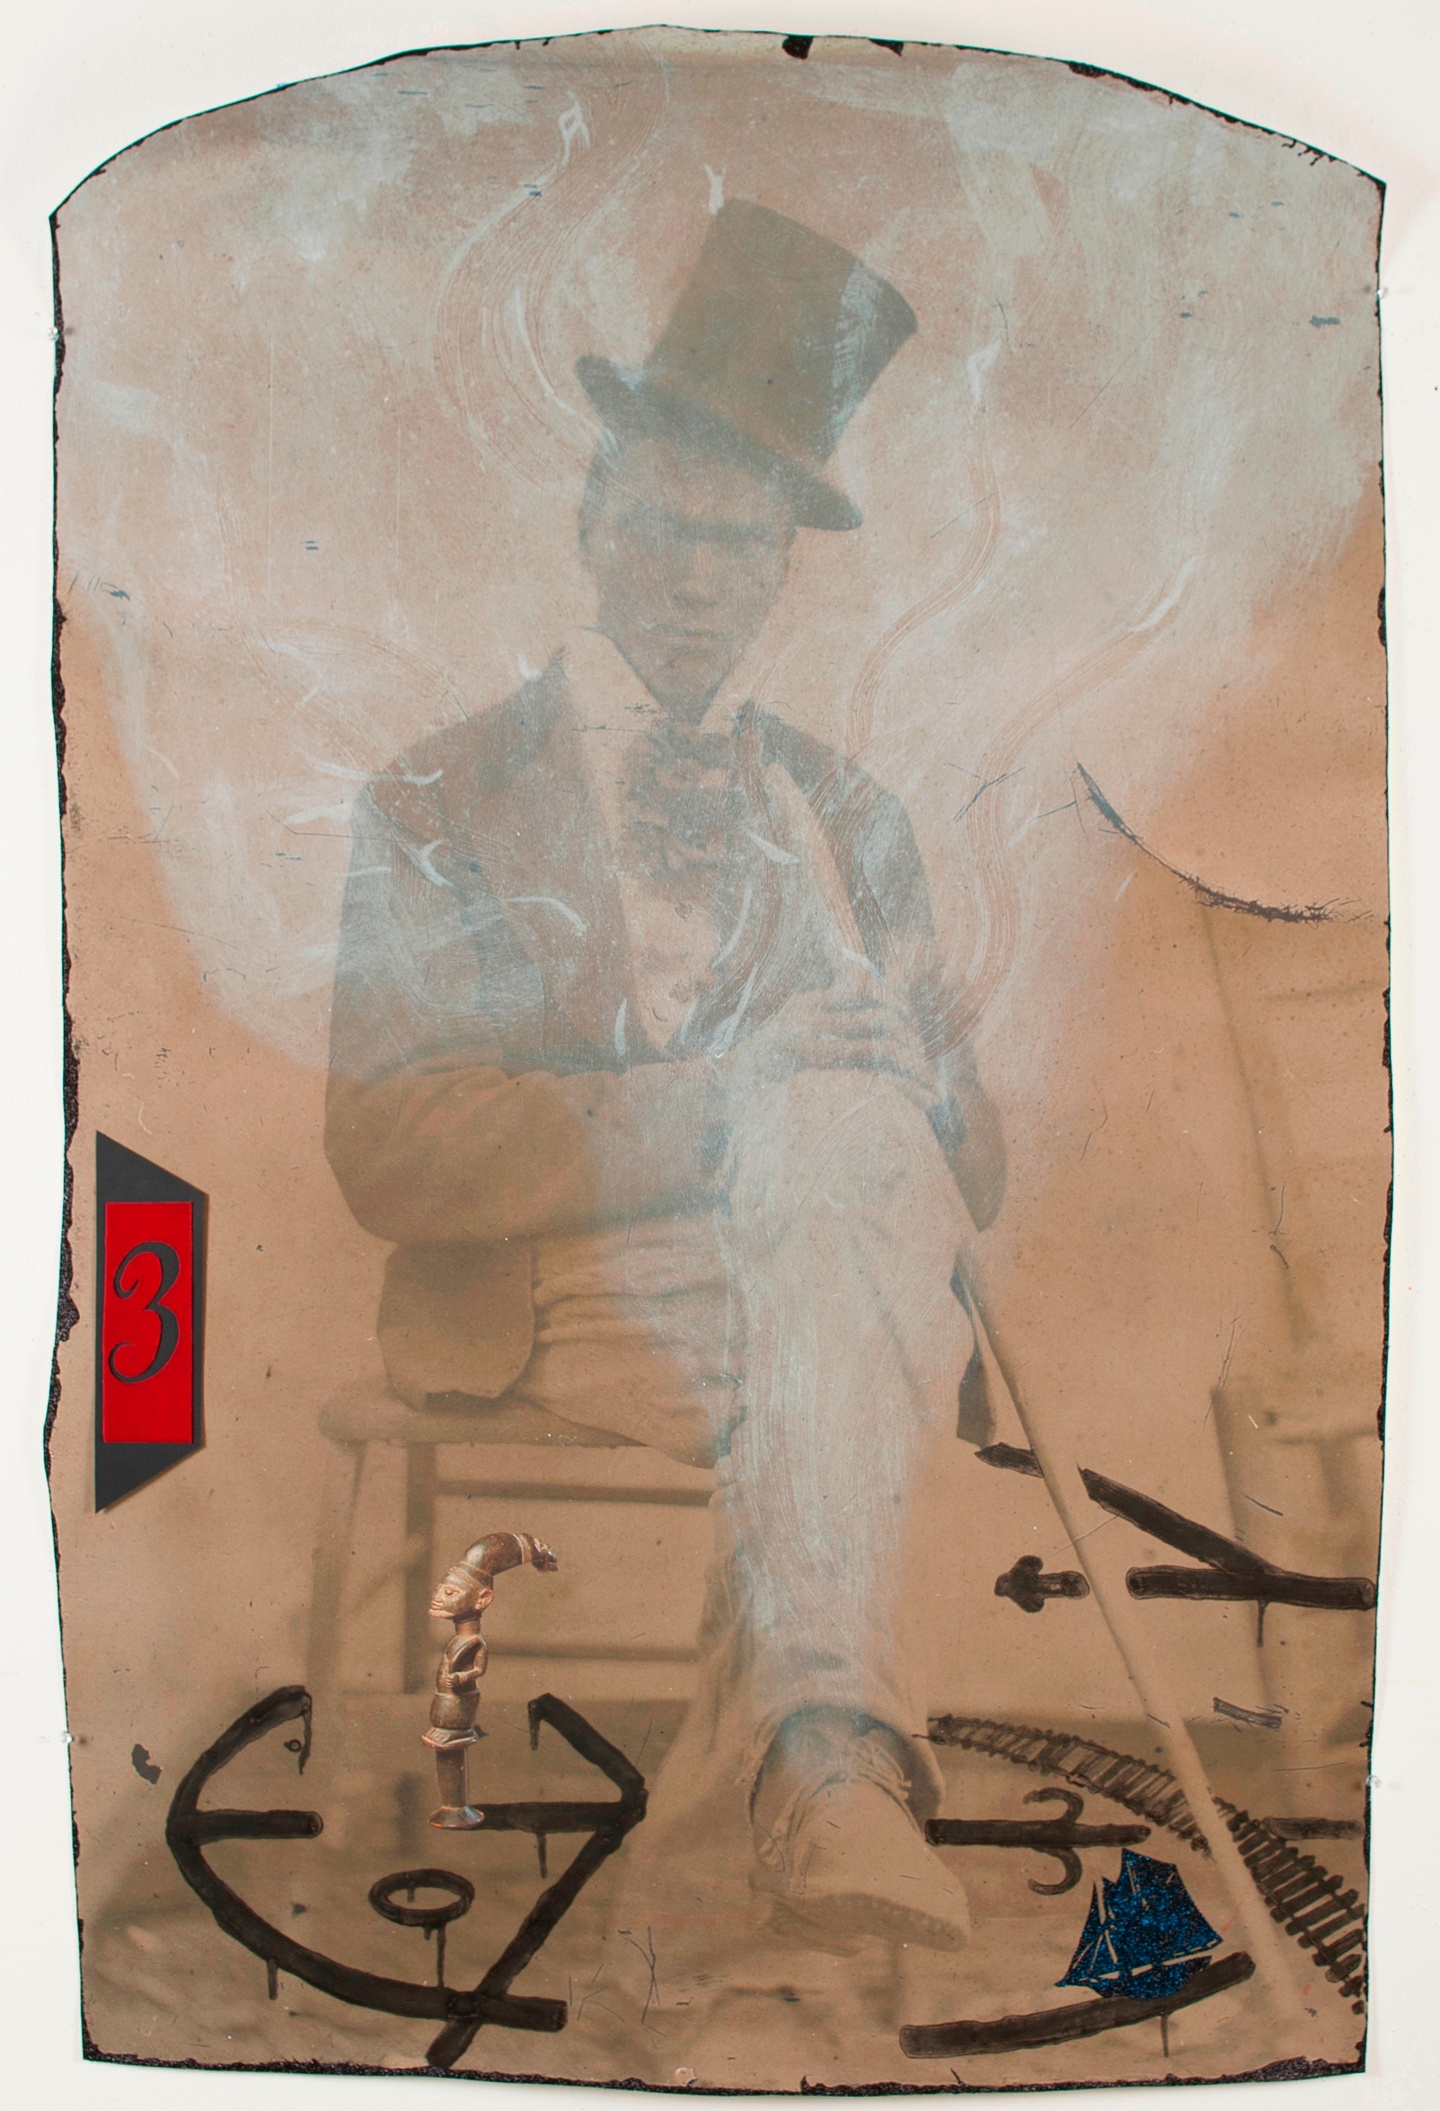 tintype image of man wearing a top hat sitting in a chair with smoky haze, markings on the floor, and the number 3 in red on the left side of the image